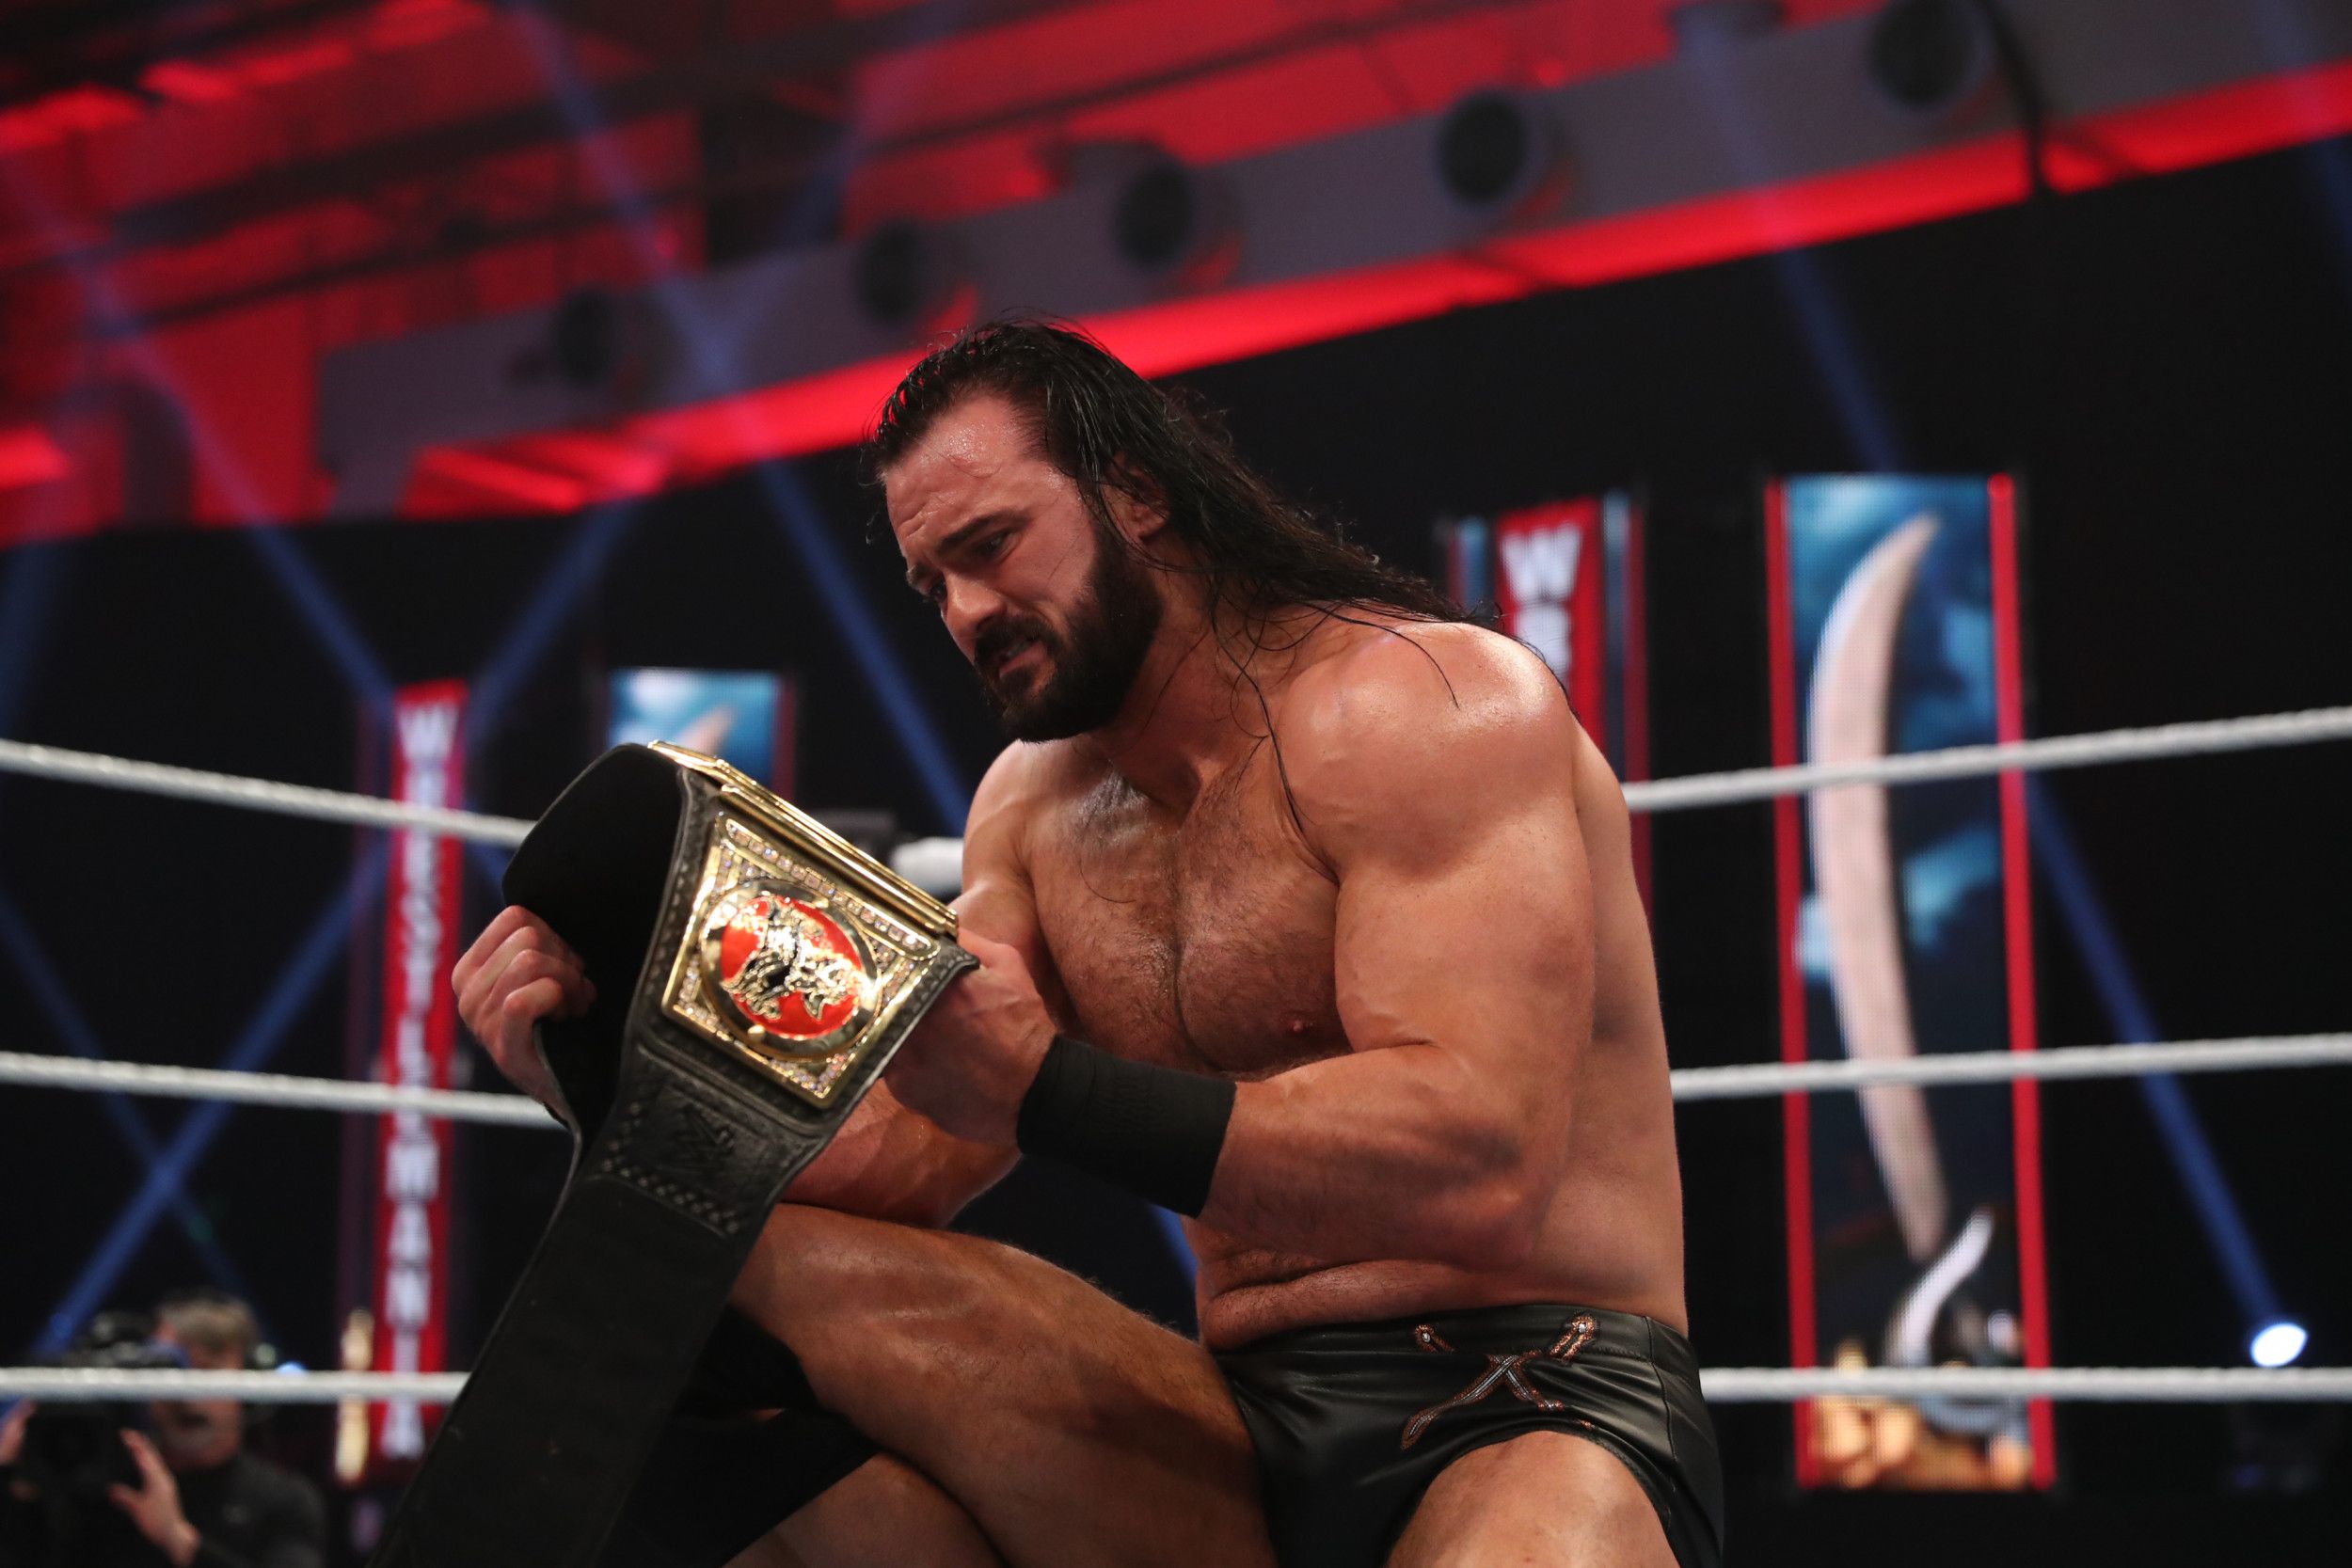 Drew McIntyre Defeats Brock Lesnar to Win WWE Championship at